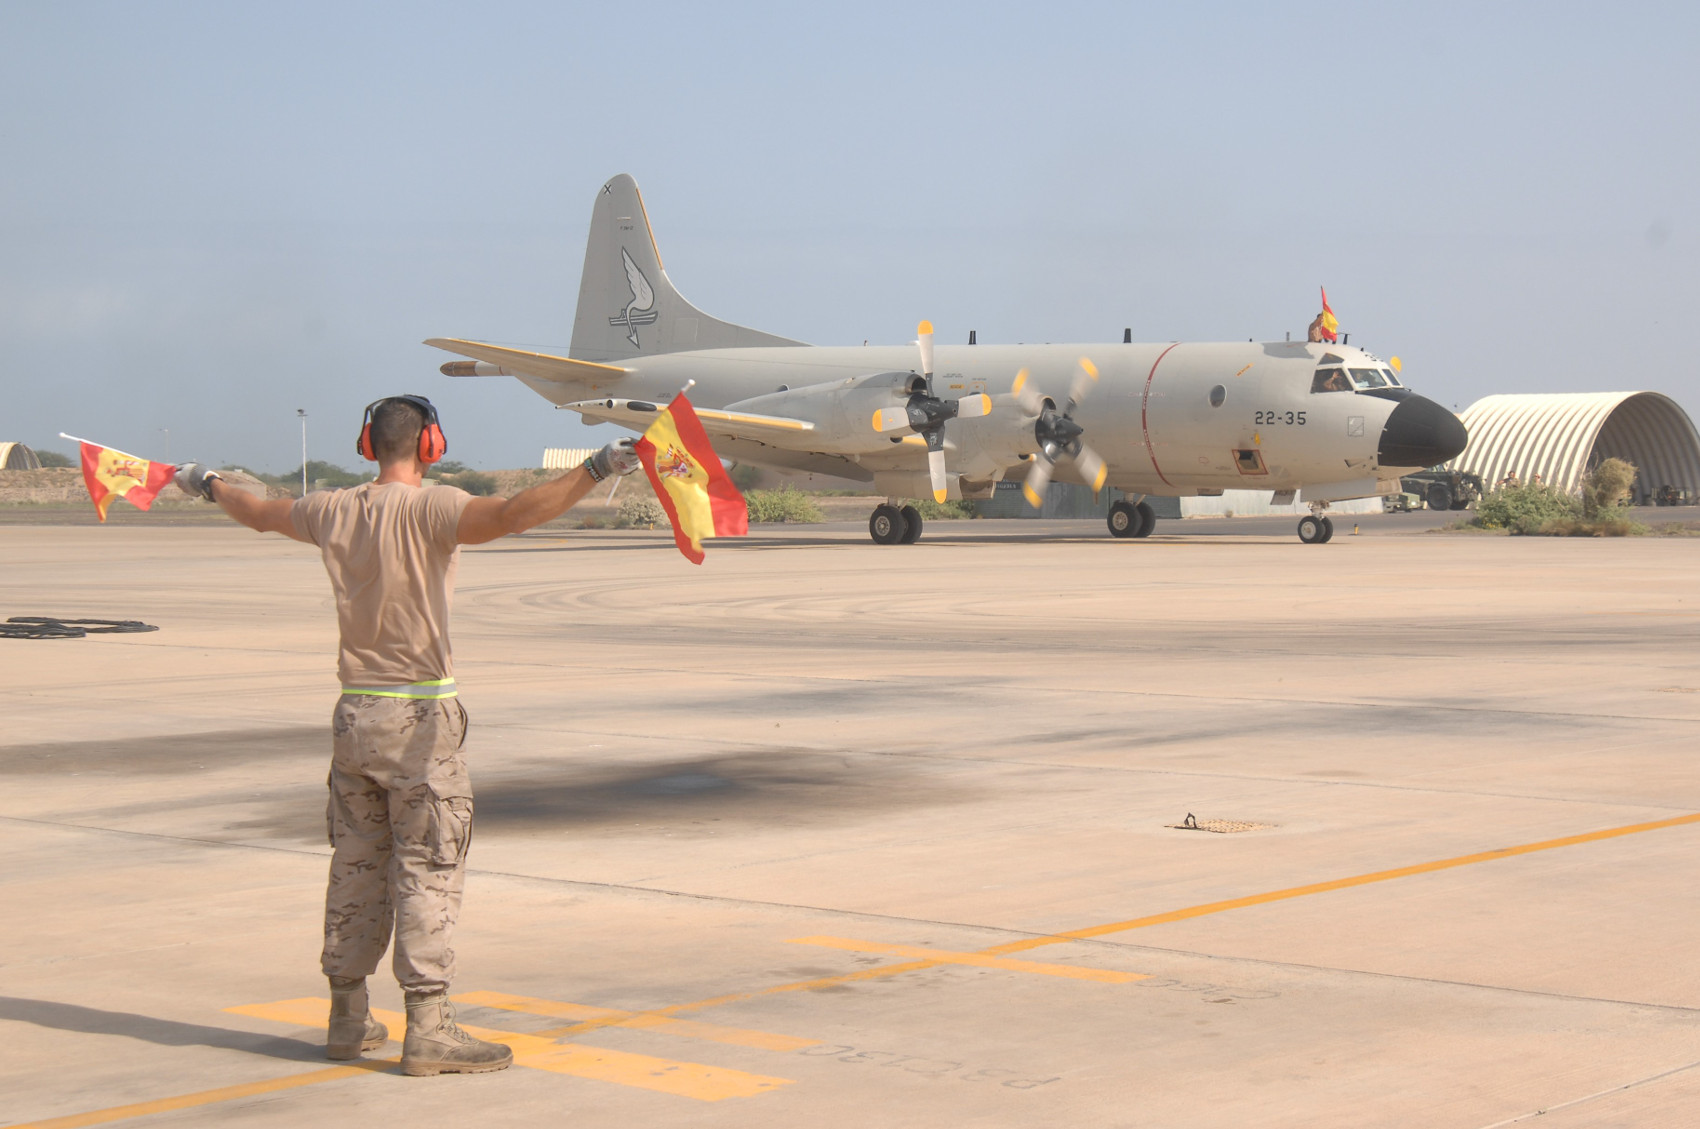 The 68th rotation of the Orion Detachment bids farewell with 200 anti-piracy flying hours in the Indian Ocean